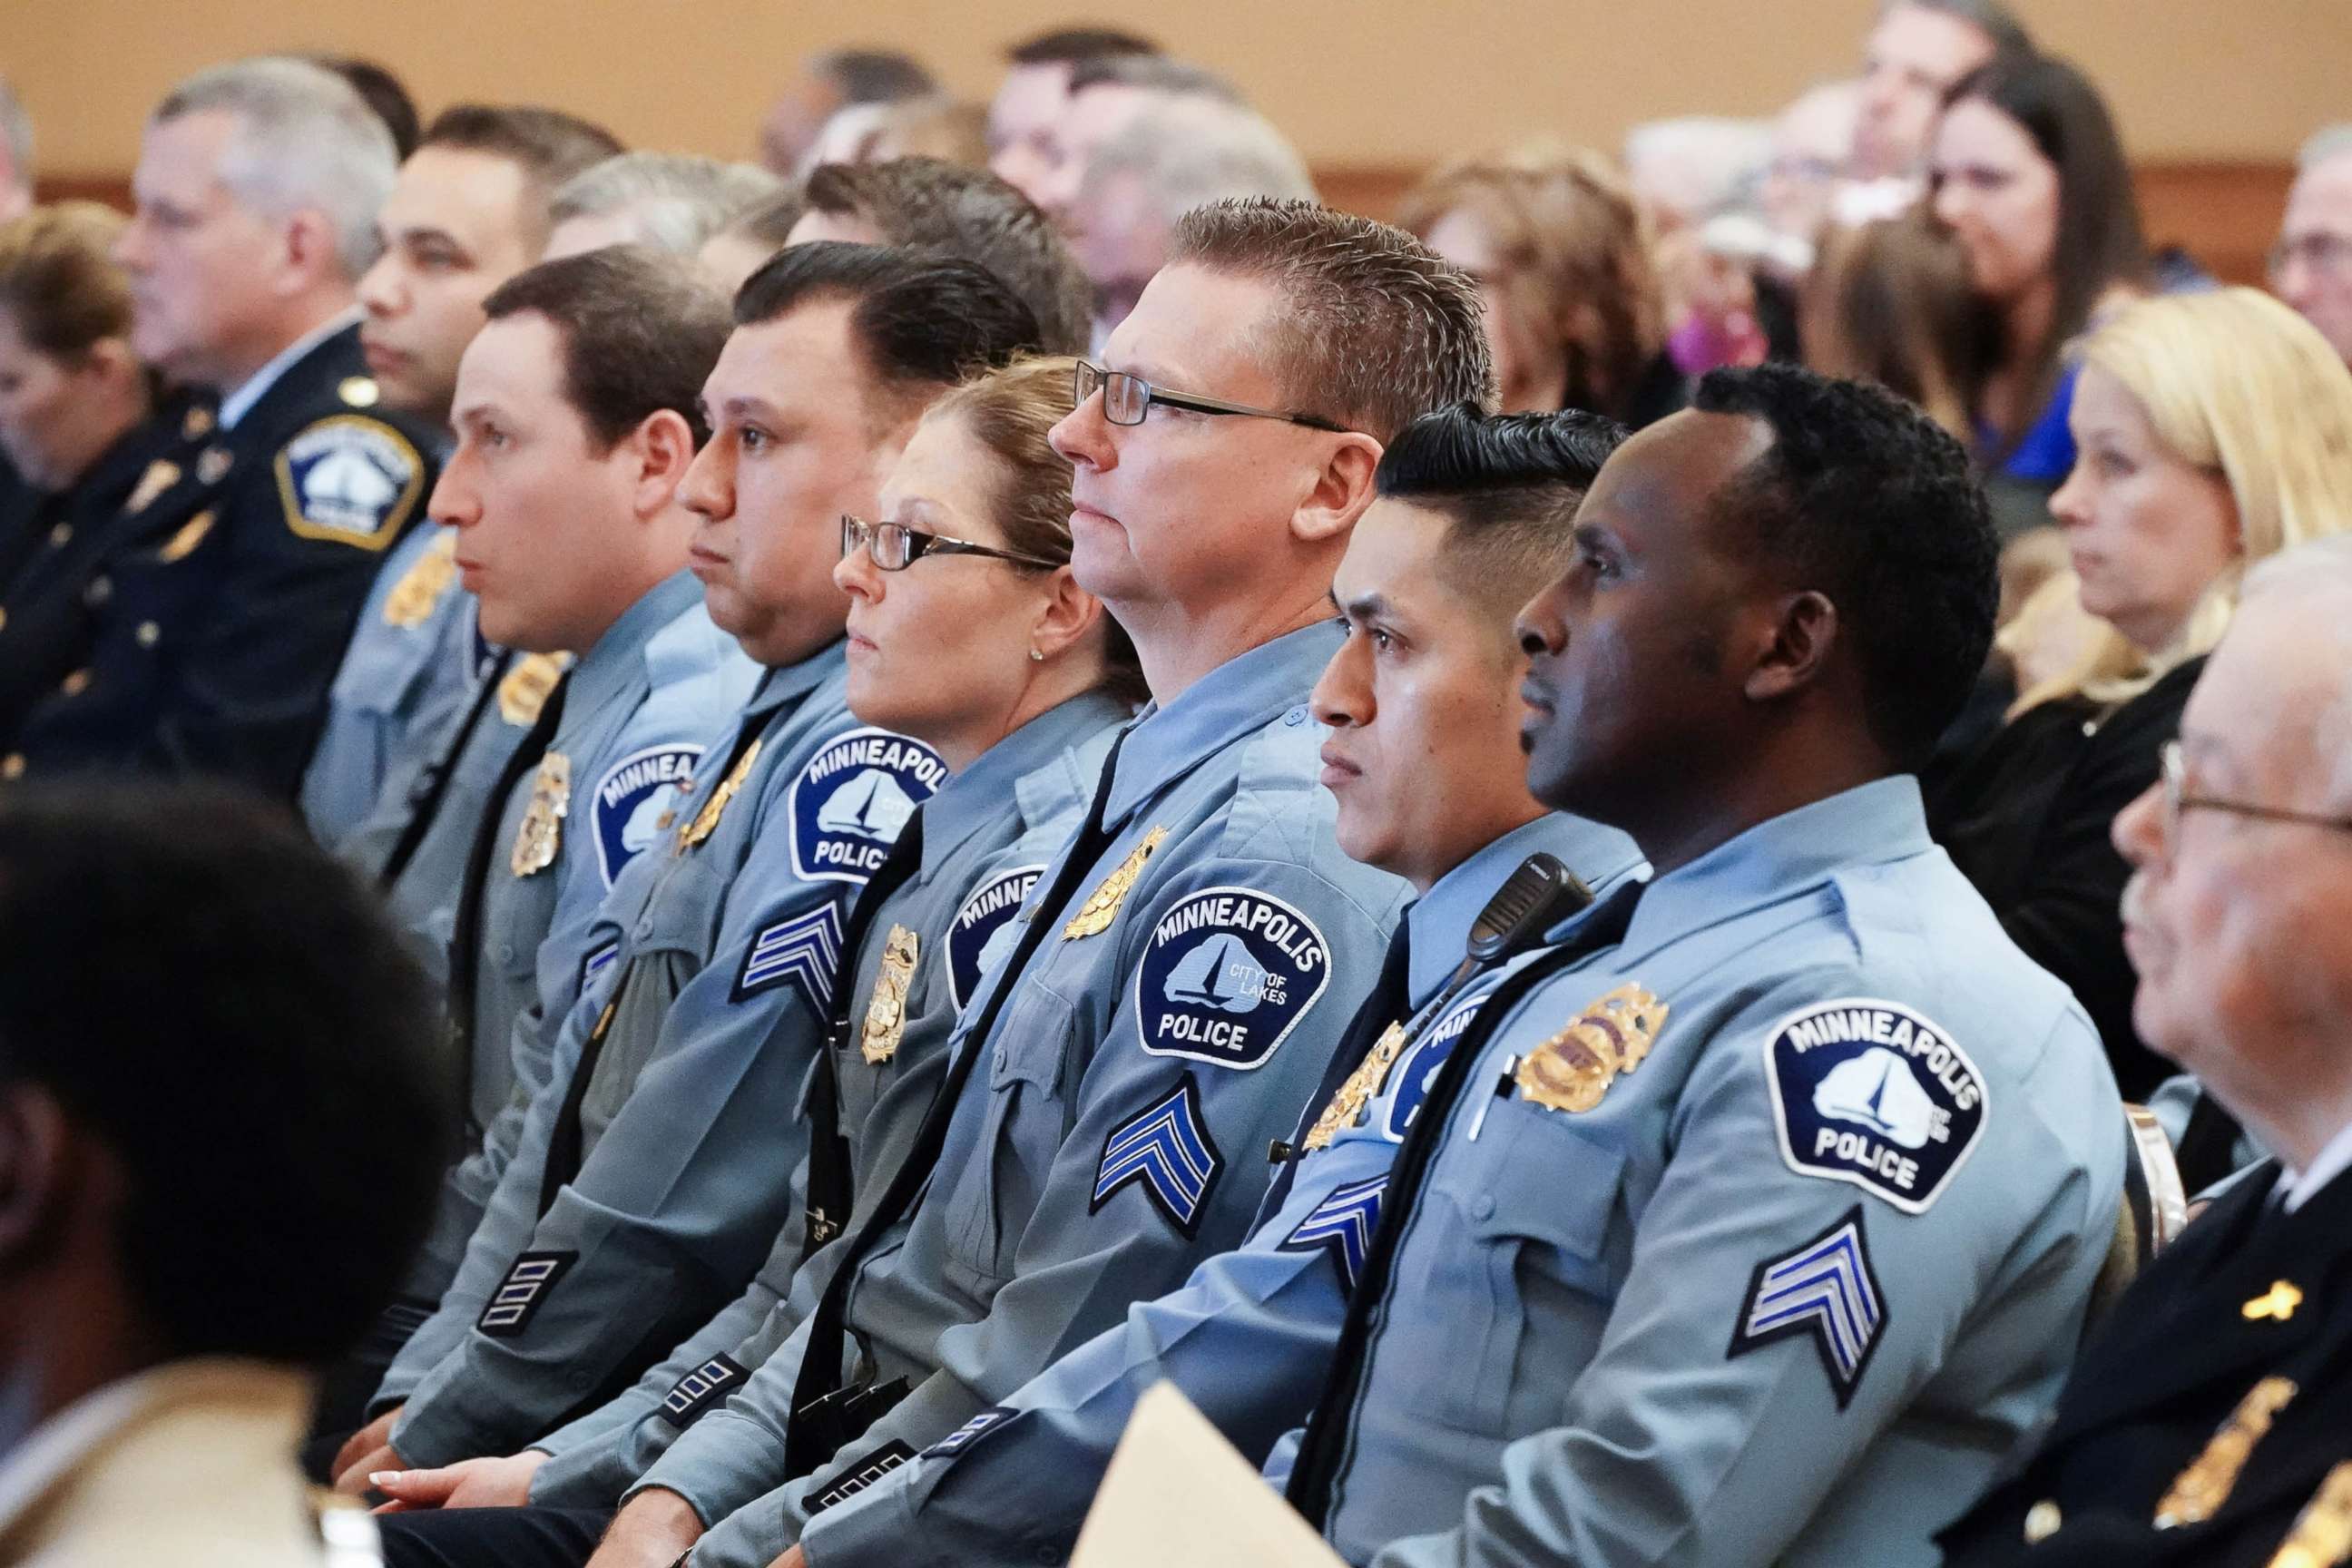 PHOTO: New sergeants are sworn in for the Minneapolis Police Department promotional ceremony in south Minneapolis, April 17, 2018.